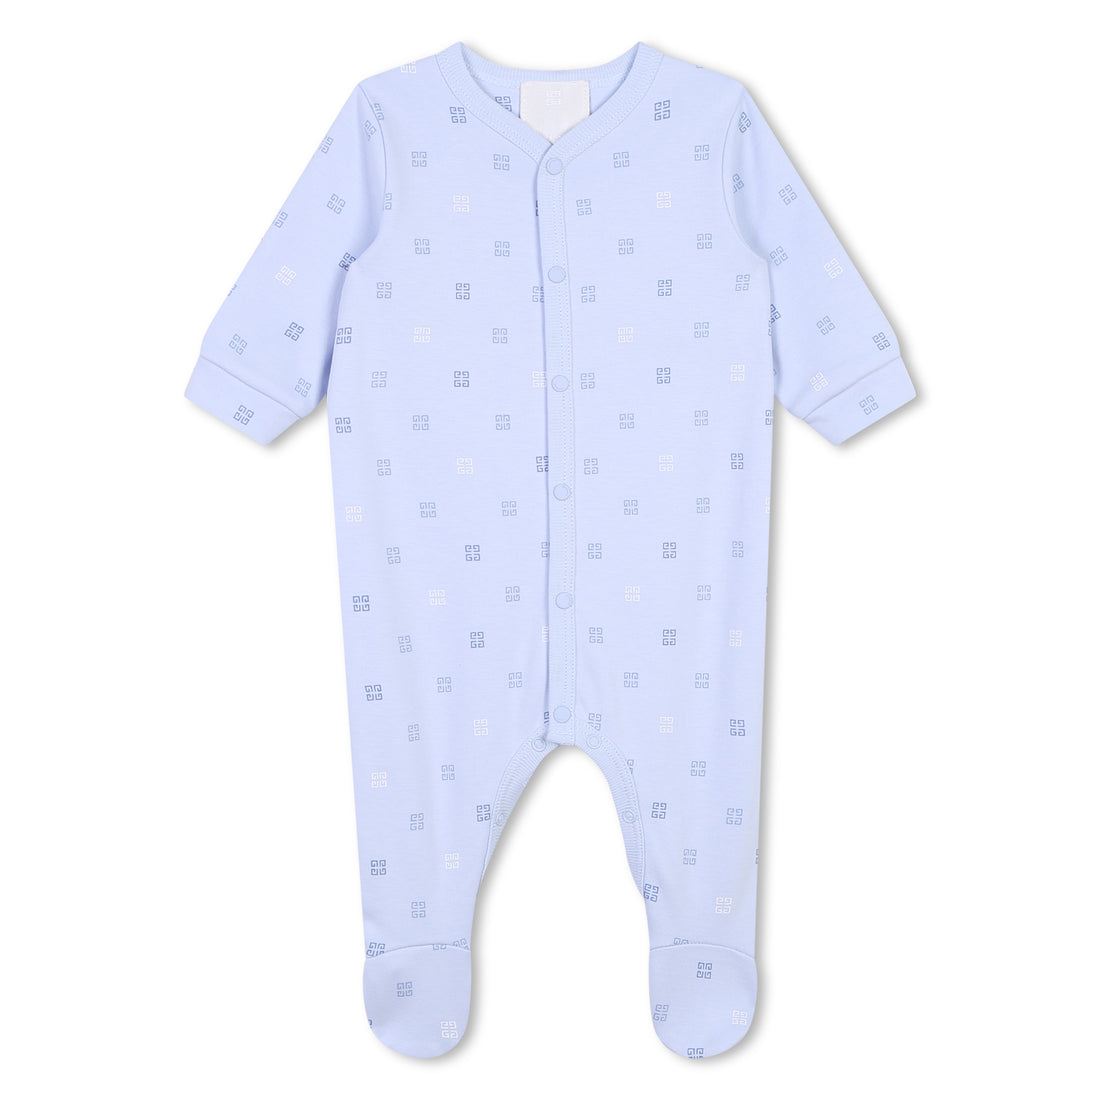 Givenchy Baby Pyjamas Pale Blue - Soft and Cozy Sleepwear | Schools Out